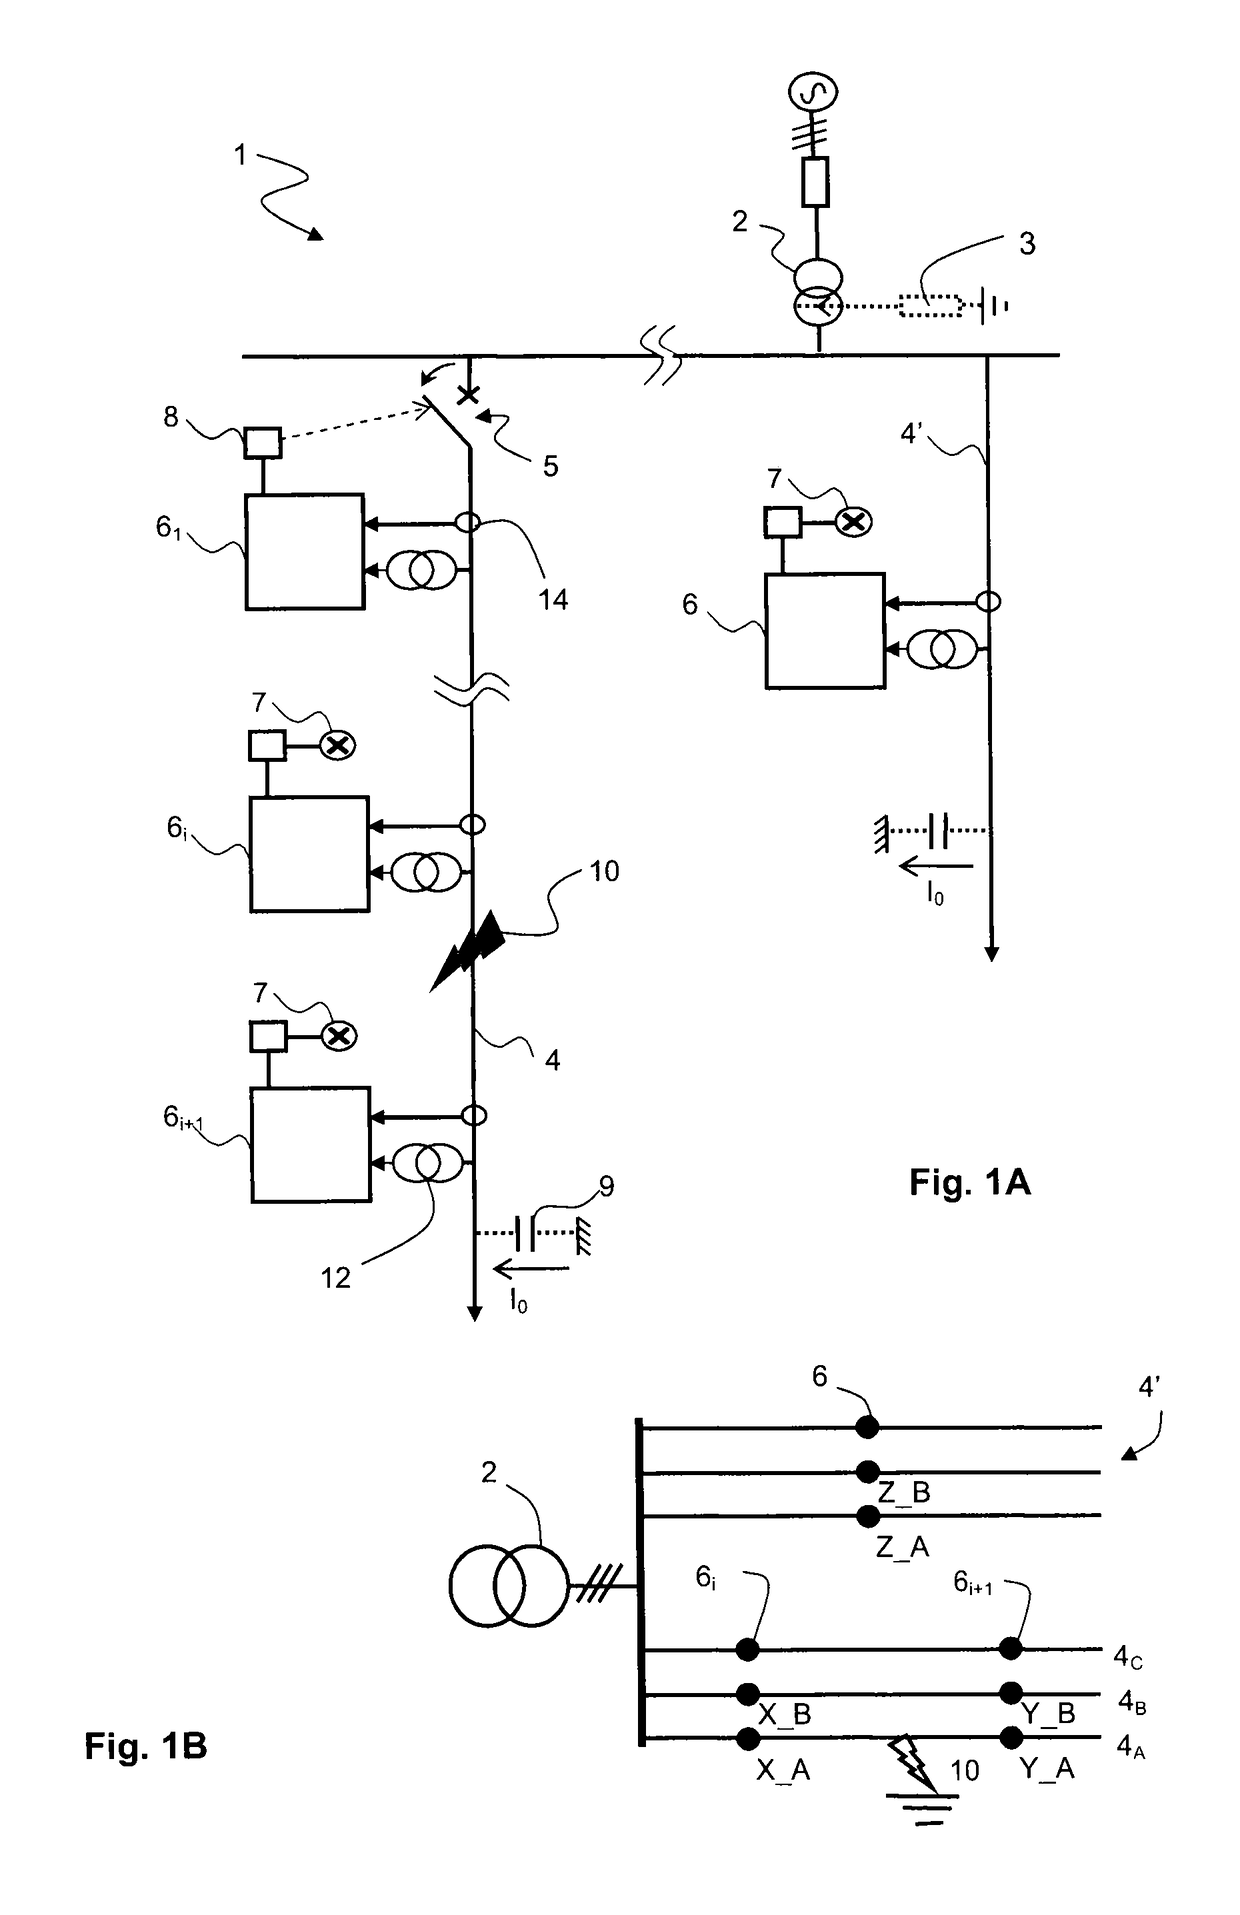 Detecting a fault, in particular a transient fault, in an electrical network